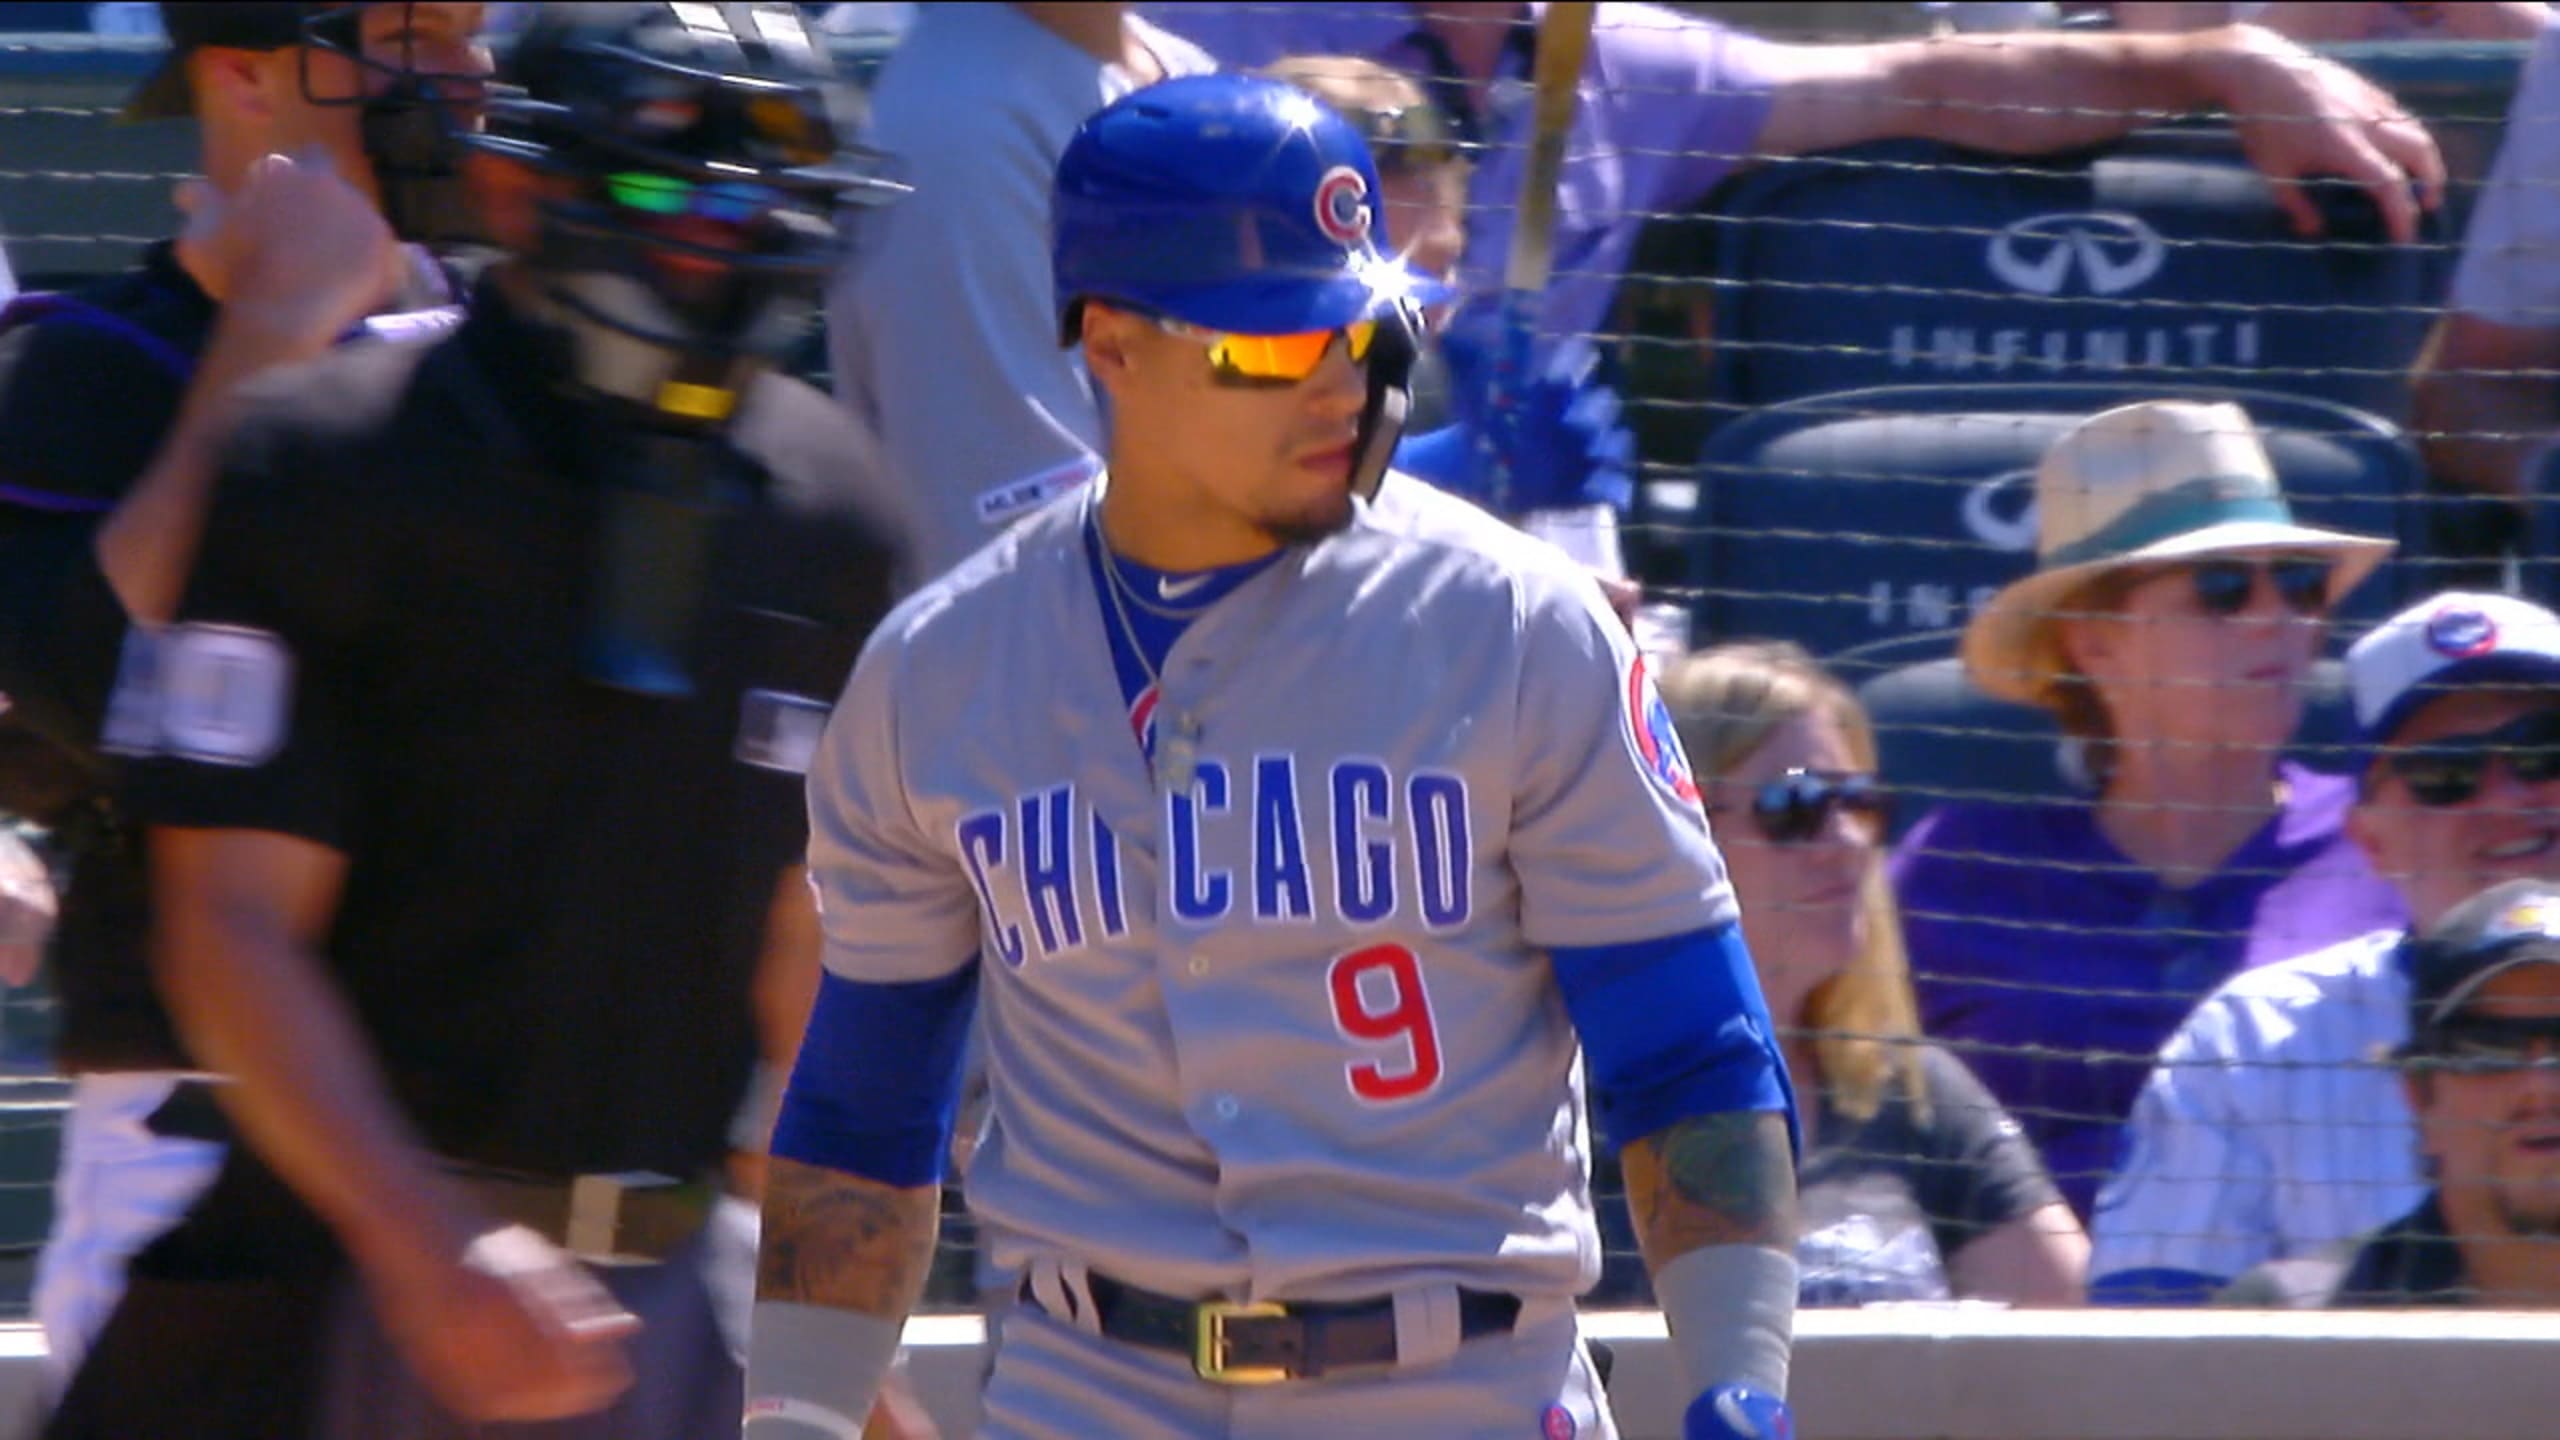 Cubs lose on Javier Baez's mistake but gain positives in process